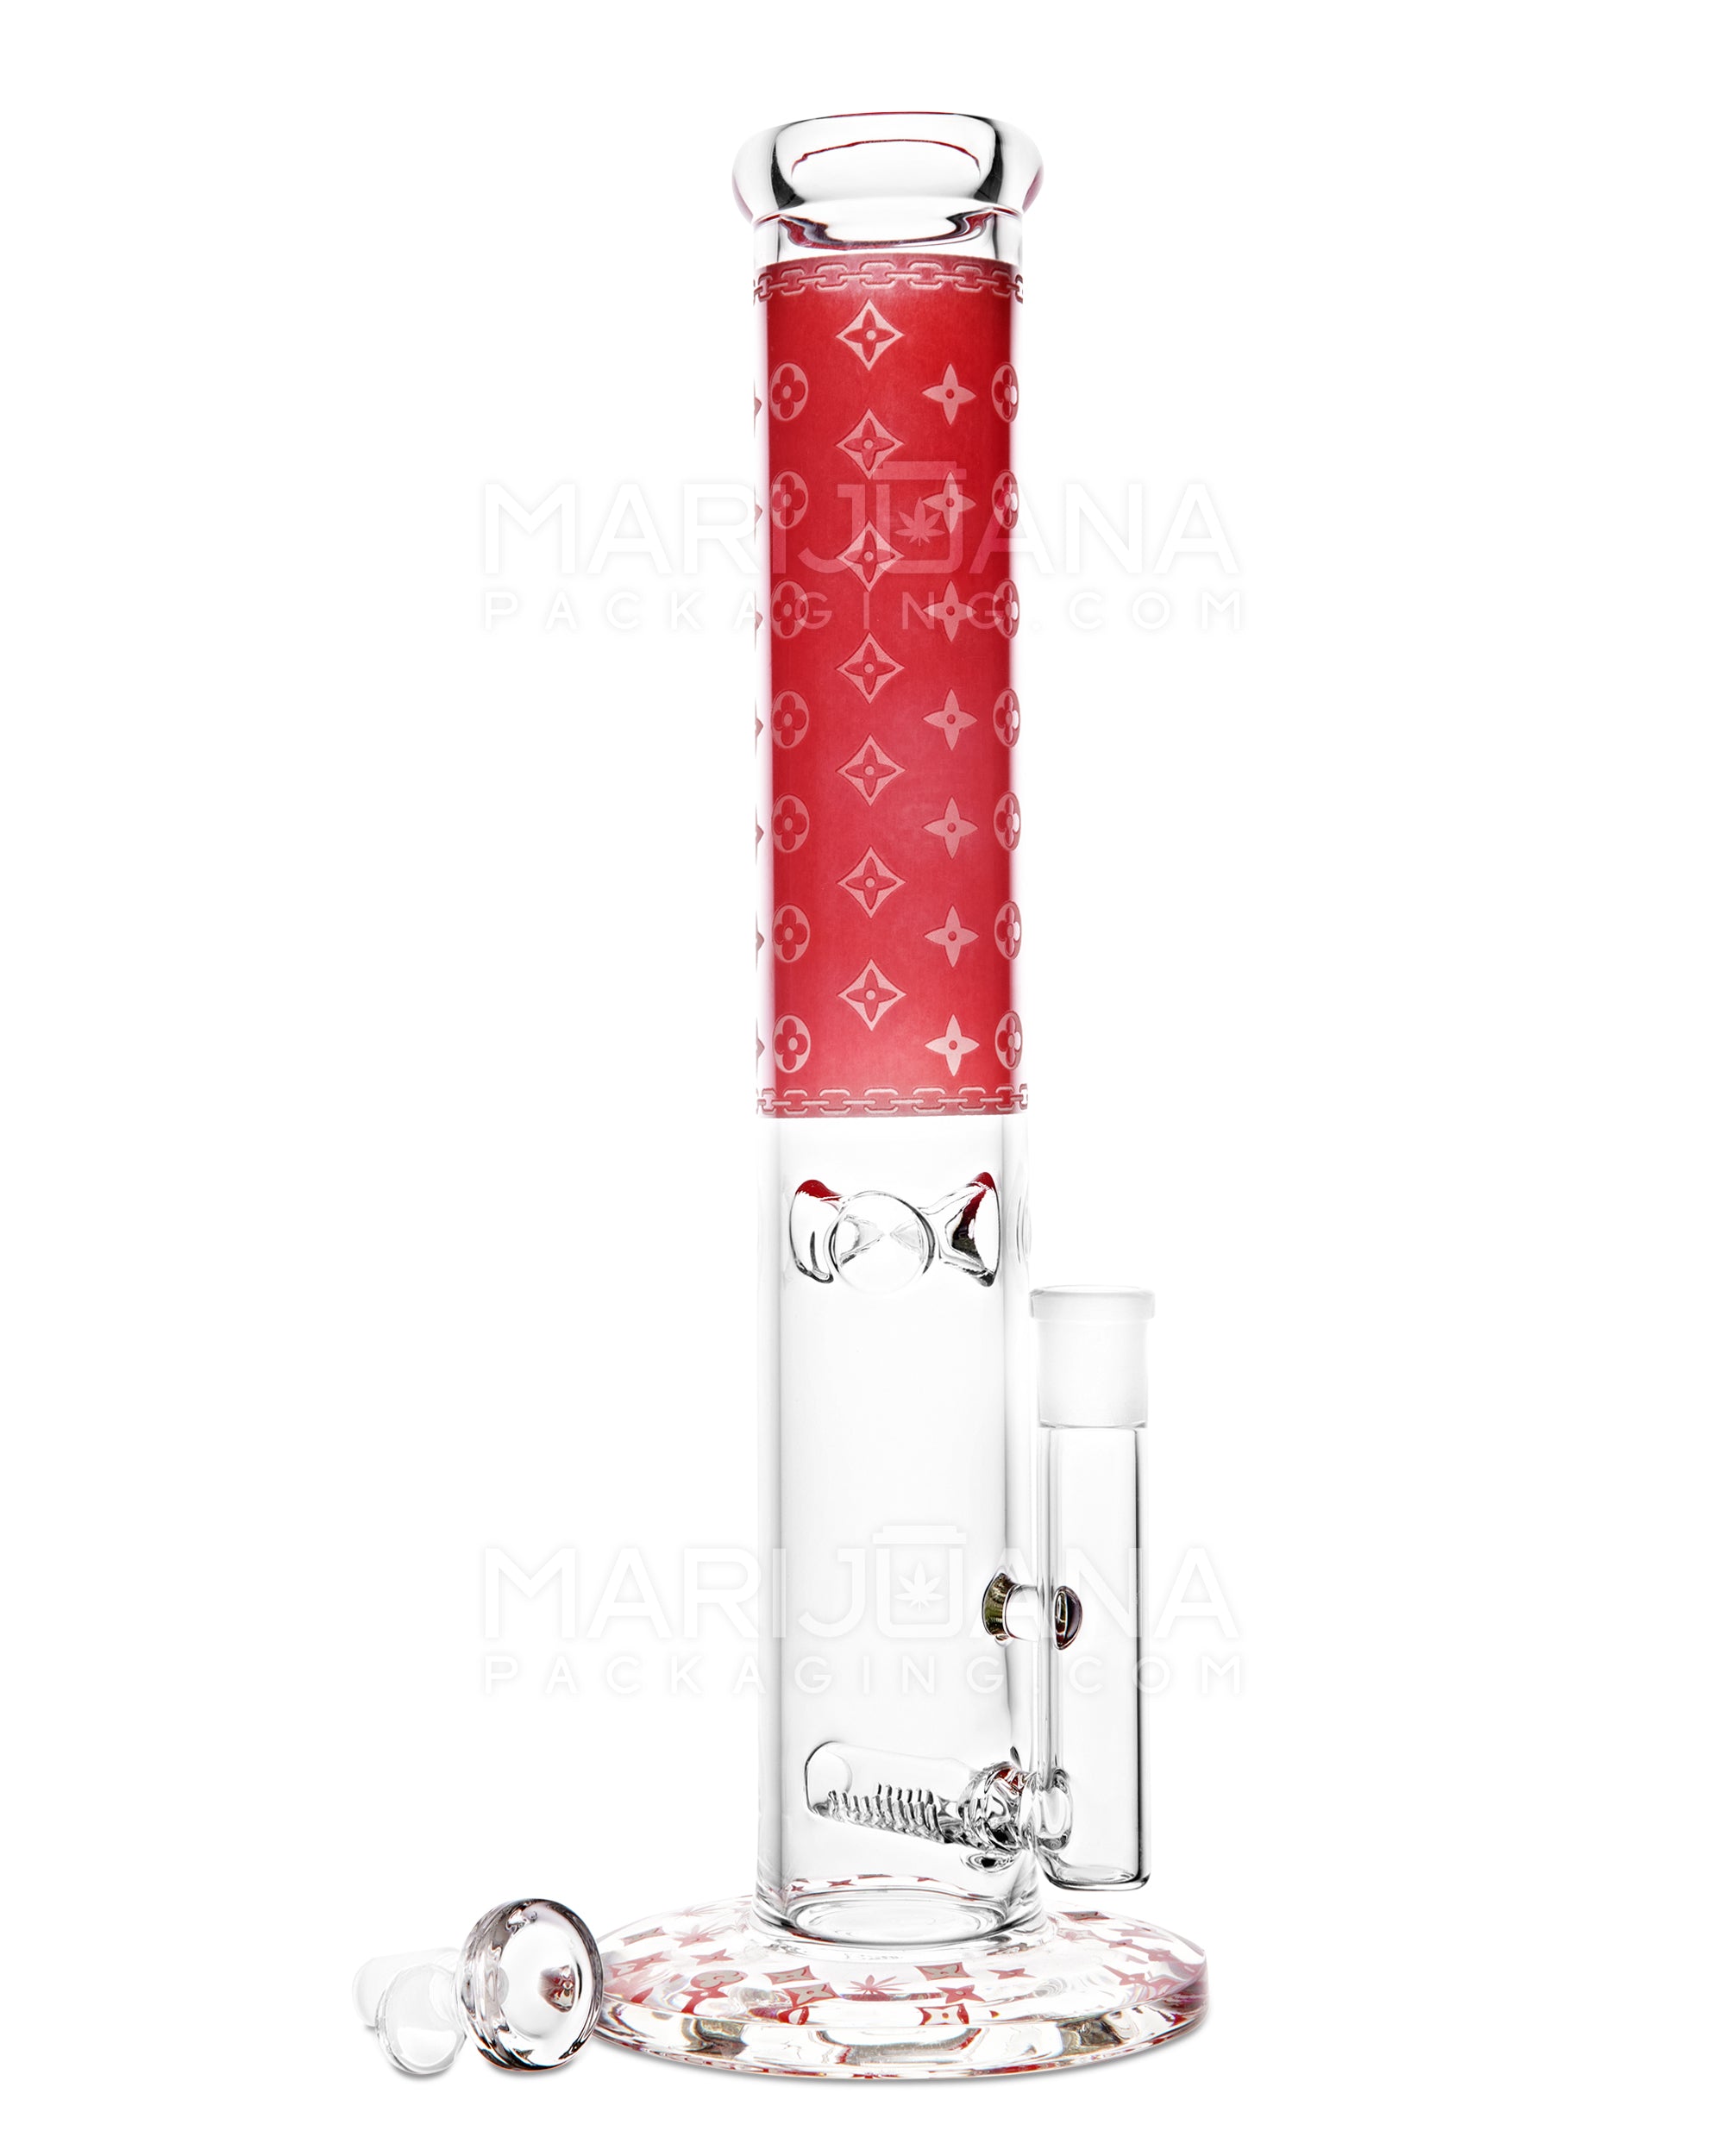 Straight Neck Luxury Design Inline Perc Glass Water Pipe w/ Ice Catcher | 14in Tall - 14mm Bowl - Red - 2